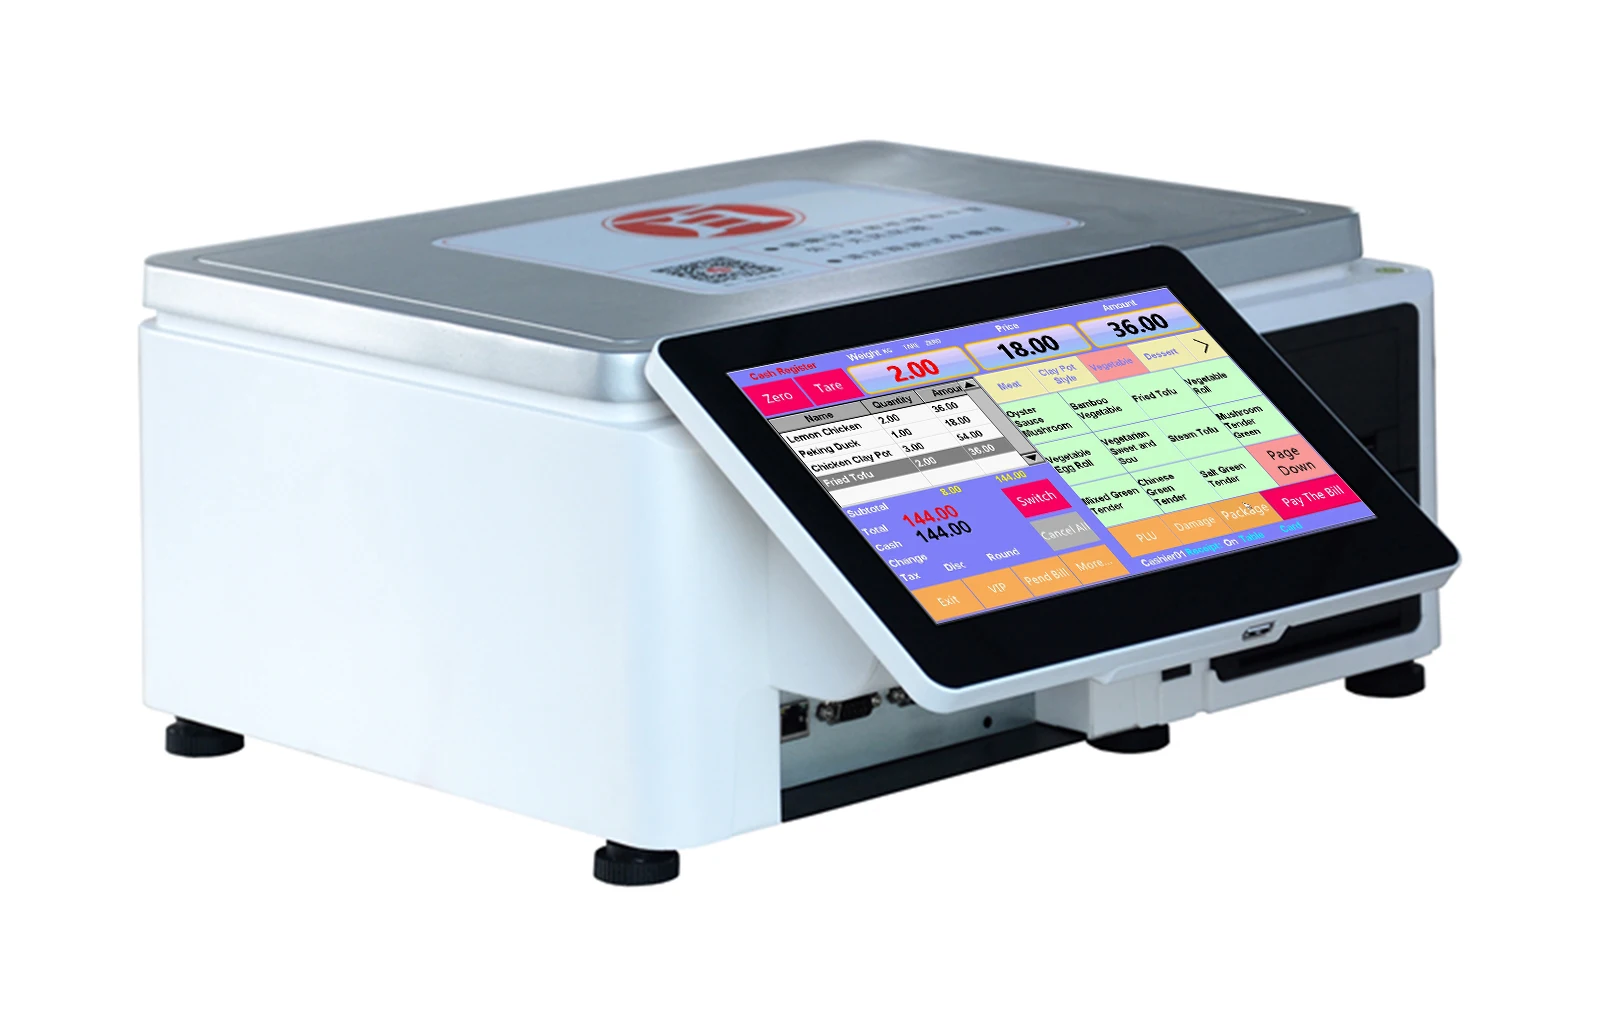 A new generation of All in one 10 inch capacitive touch screen cash register scale T10 with 58mm thermal printer